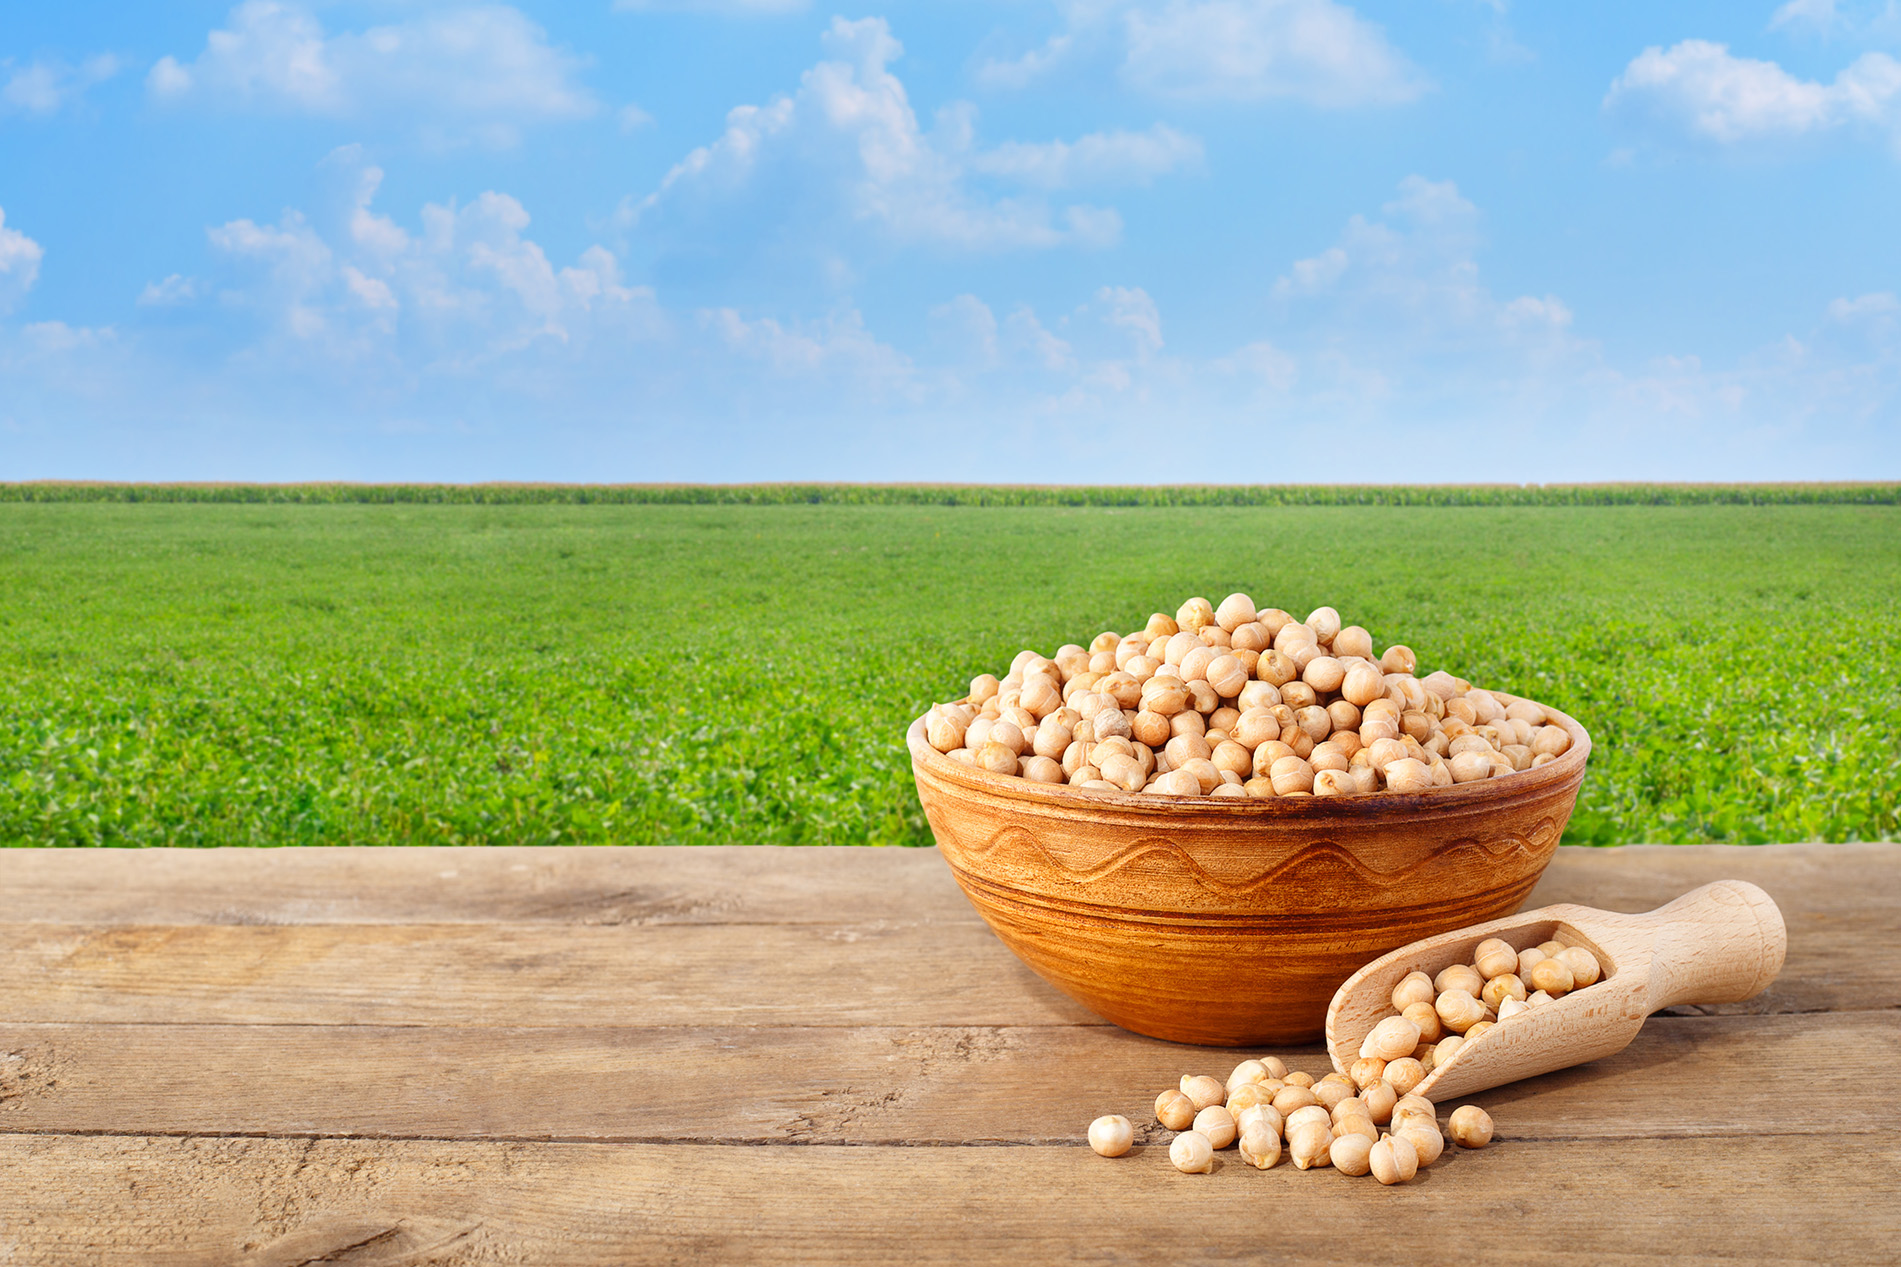 Chickpeas in bowl on table in field